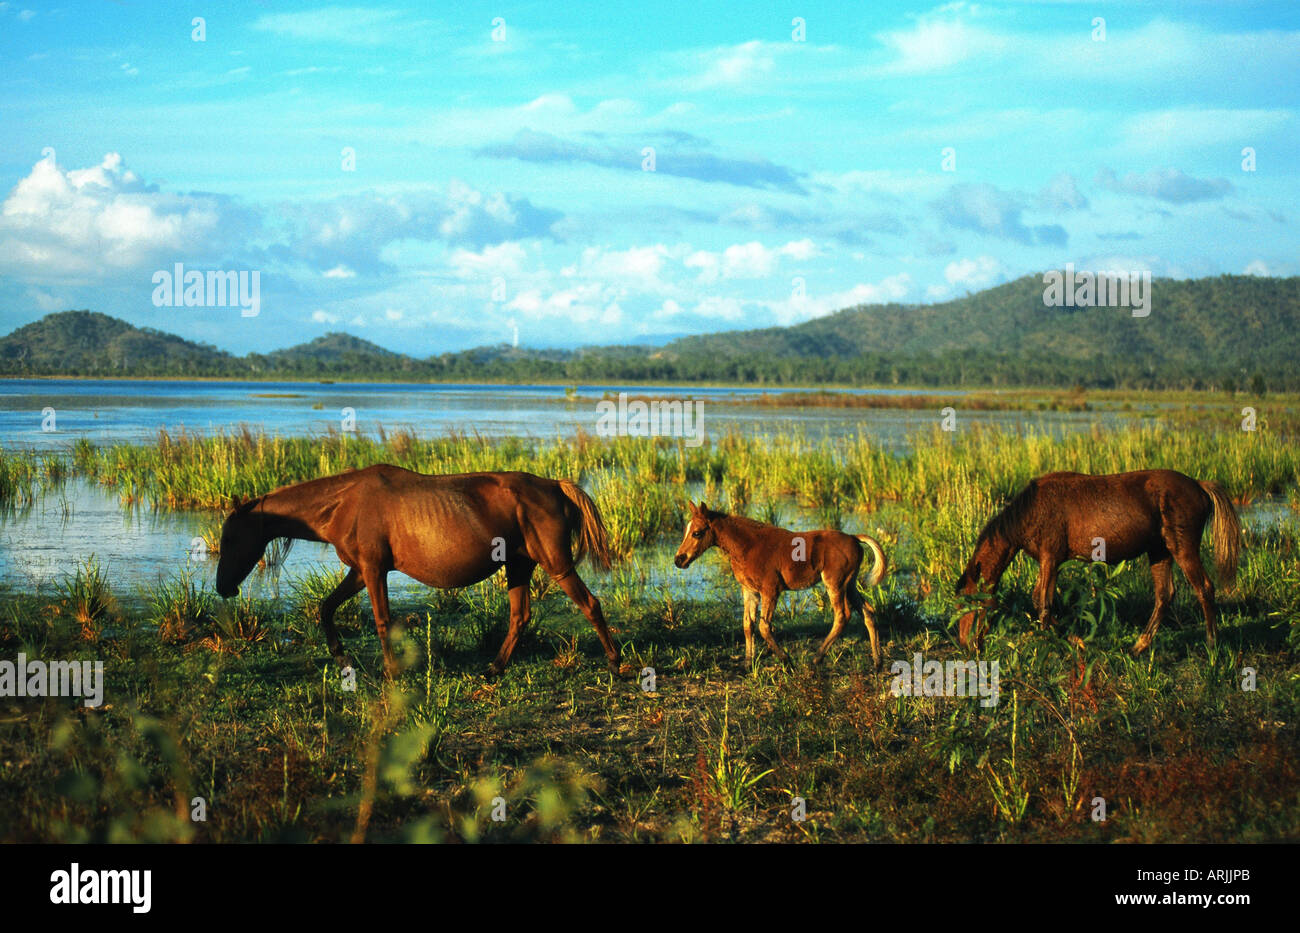 Brumby horse (Equus przewalskii f. caballus), mares with foal, Australia Stock Photo